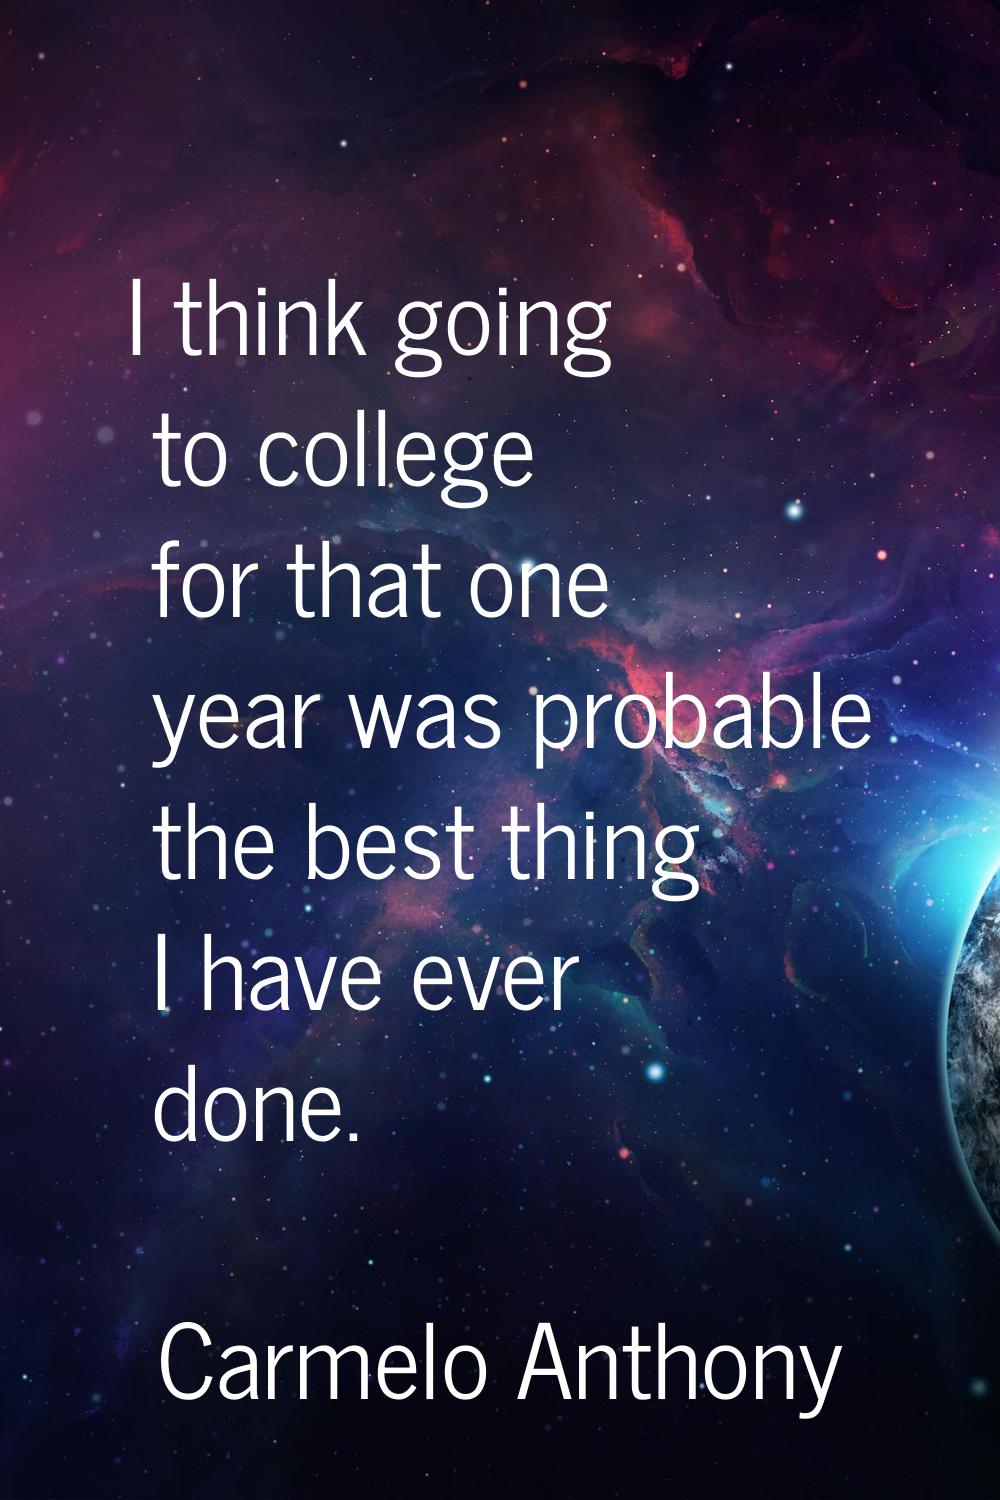 I think going to college for that one year was probable the best thing I have ever done.